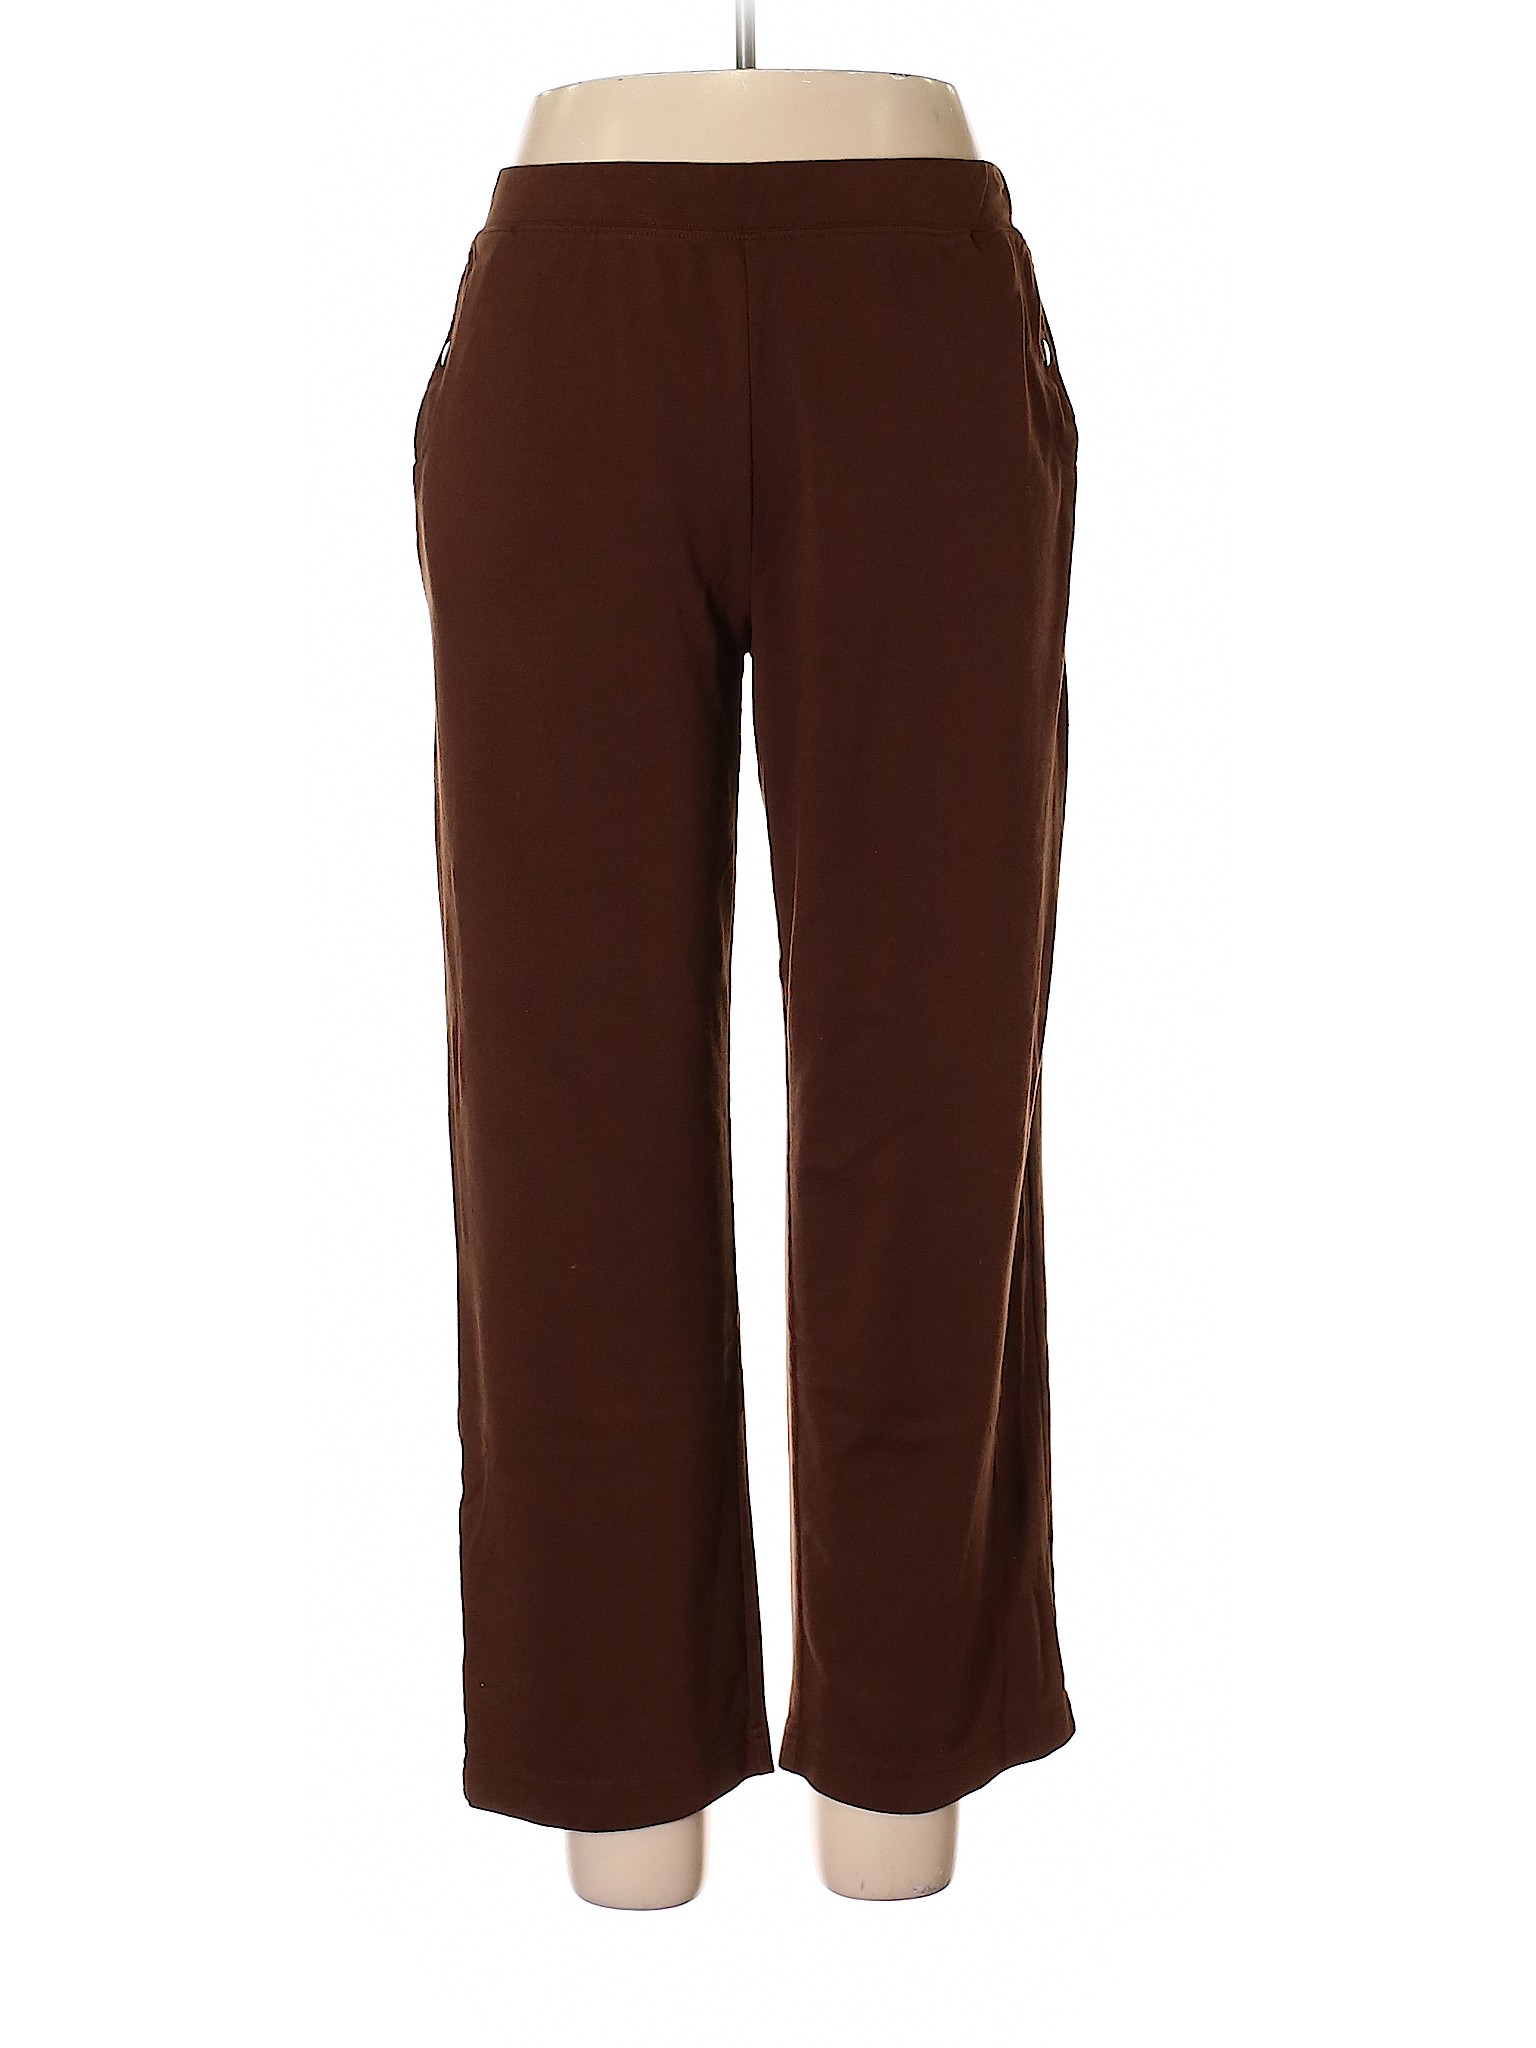 Links Solid Brown Casual Pants Size L - 83% off | thredUP